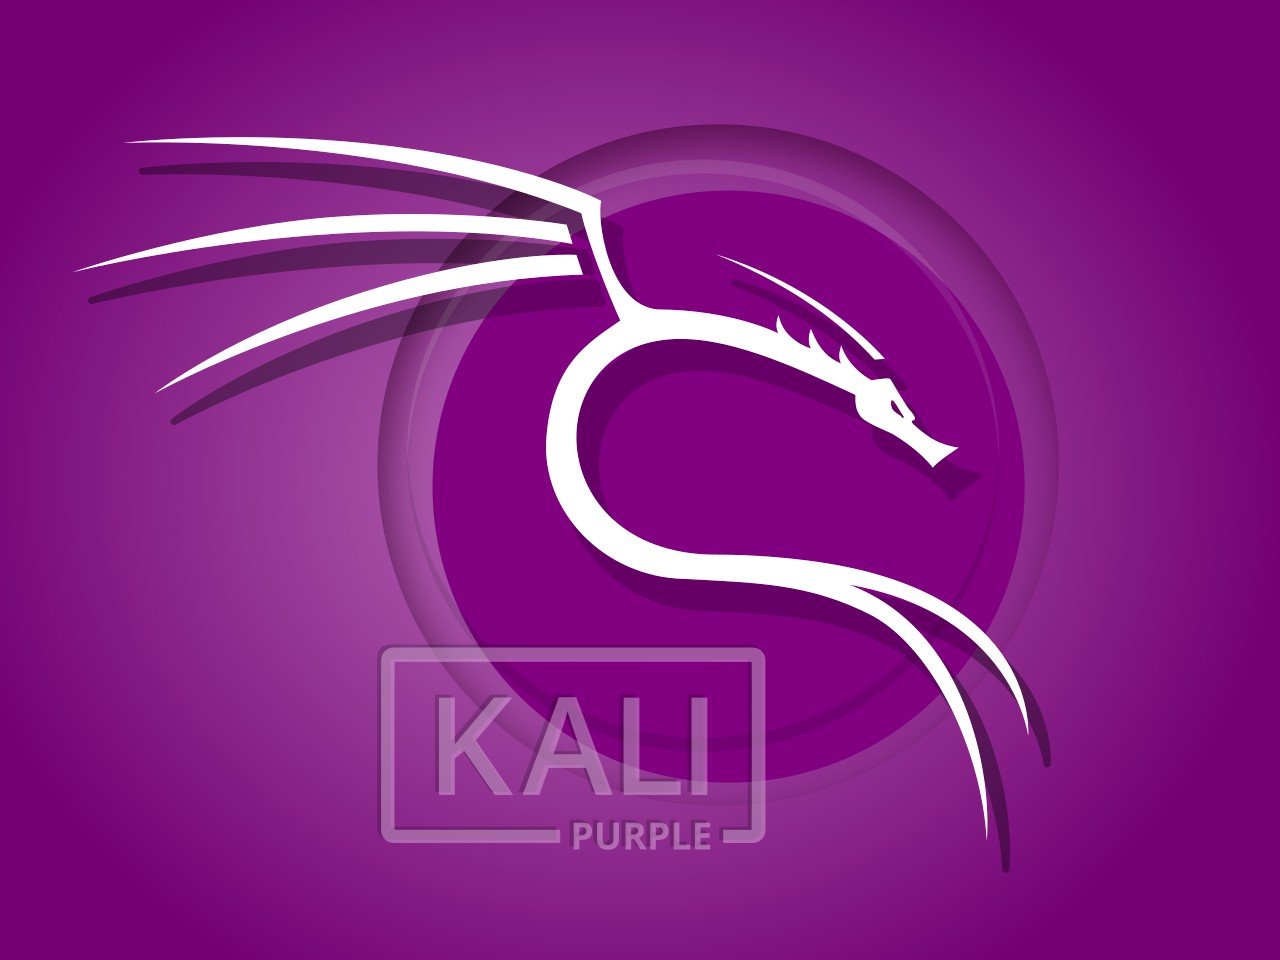 Meet the Newest Member of Kali's Family: The Purple Release